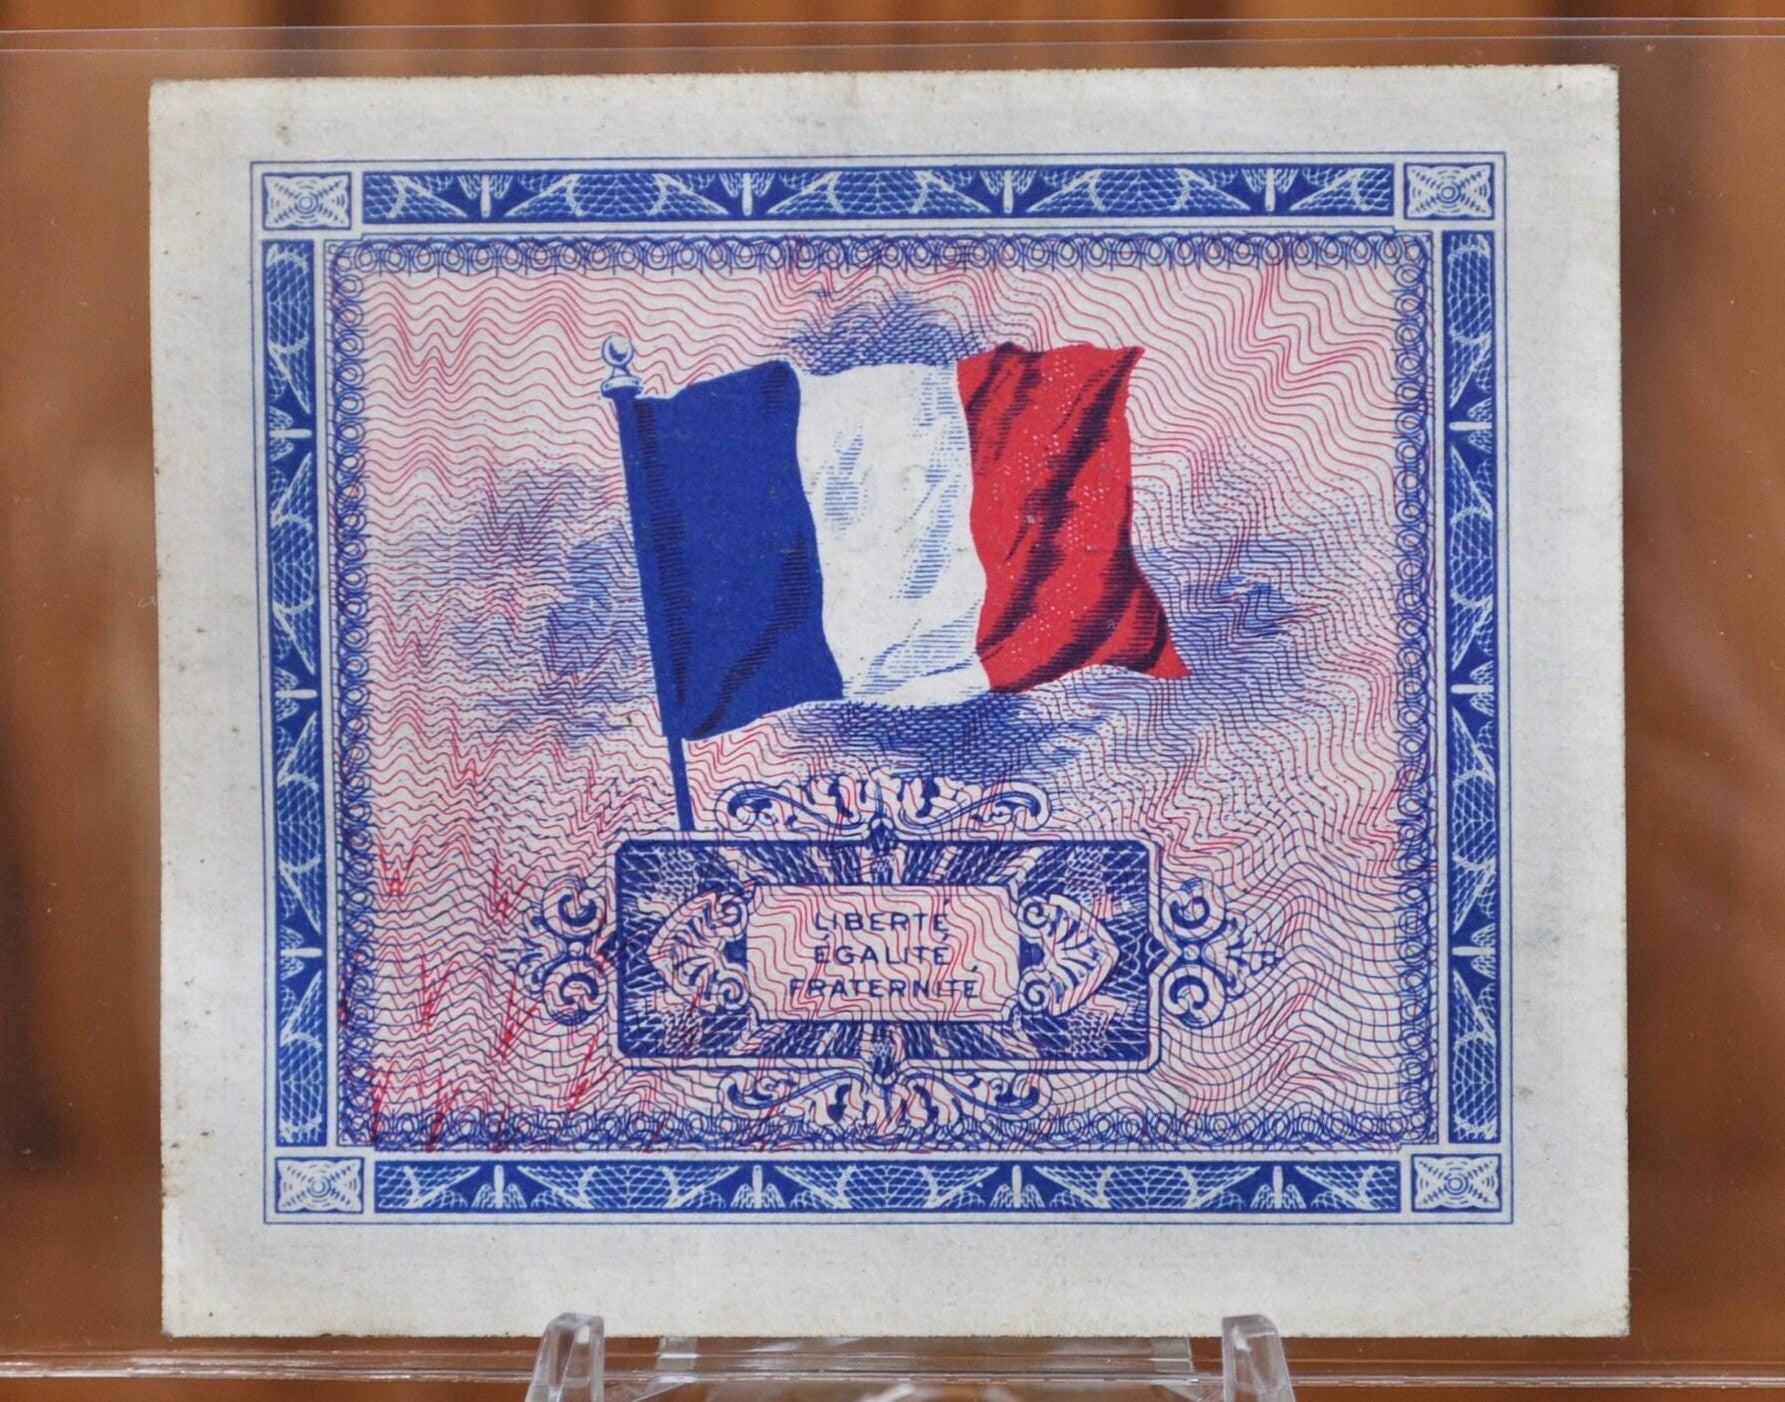 1944 France 2 Franc Paper Note - WWII Era French Bank Note, Beautiful Artwork - French 2 Francs Banknote